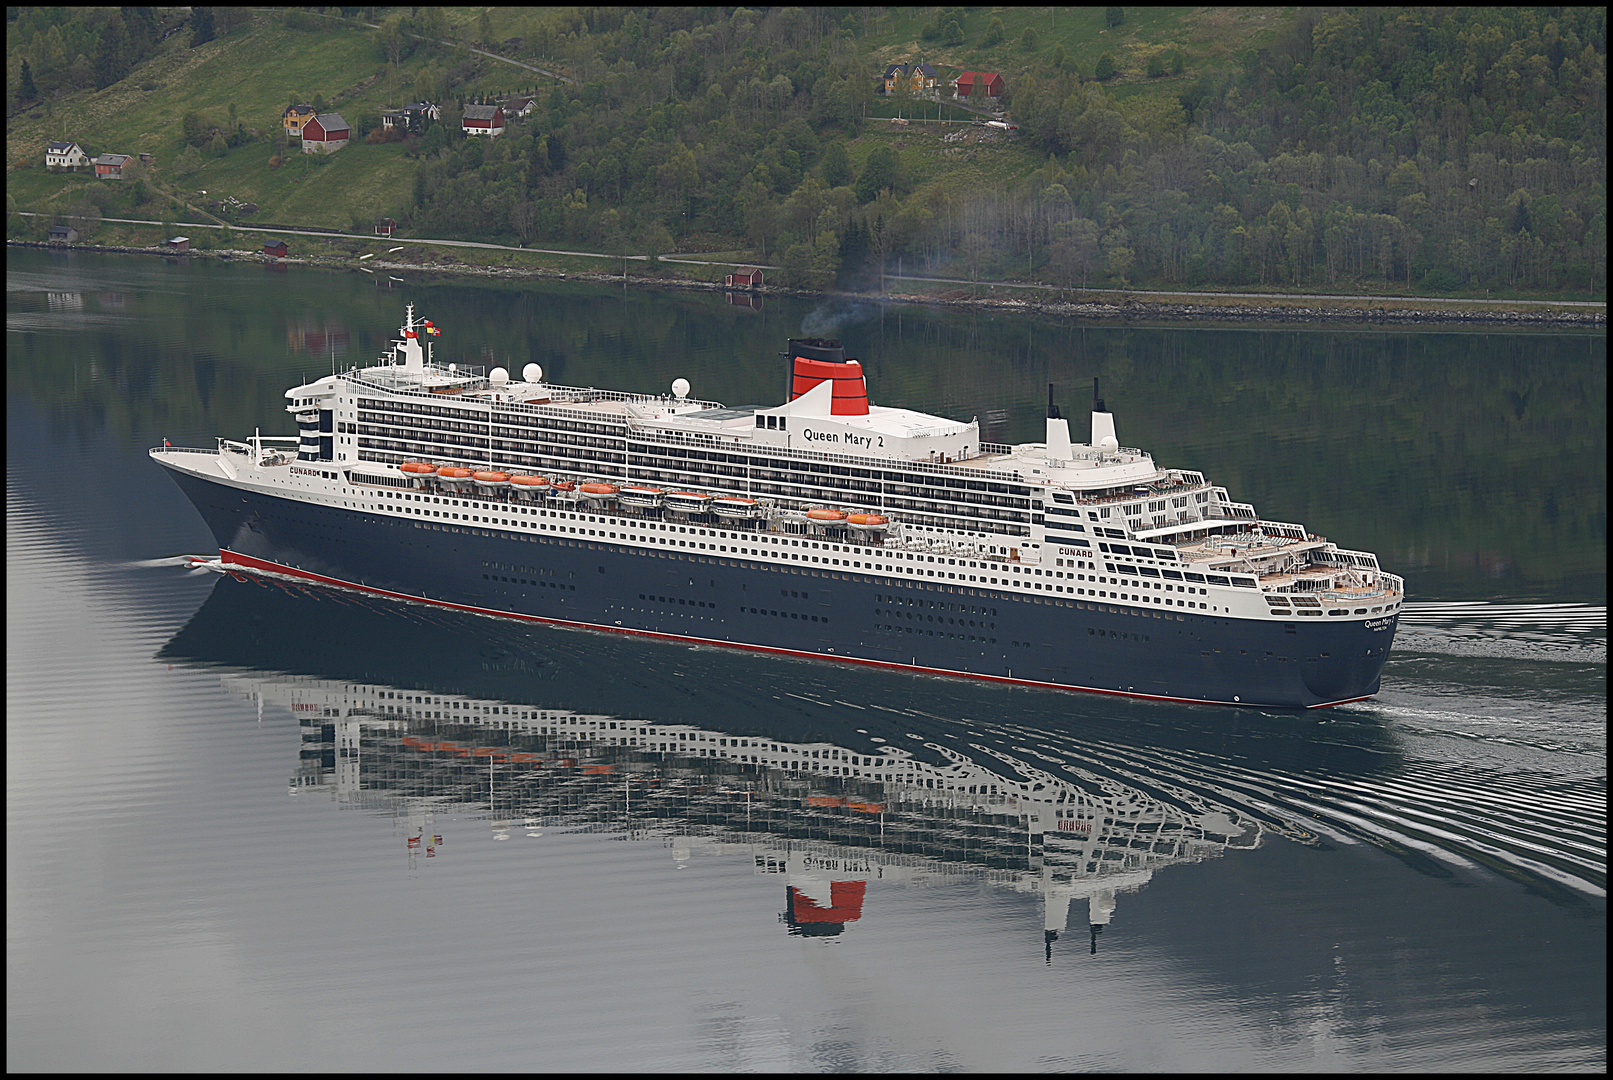 ***Queen Mary 2***